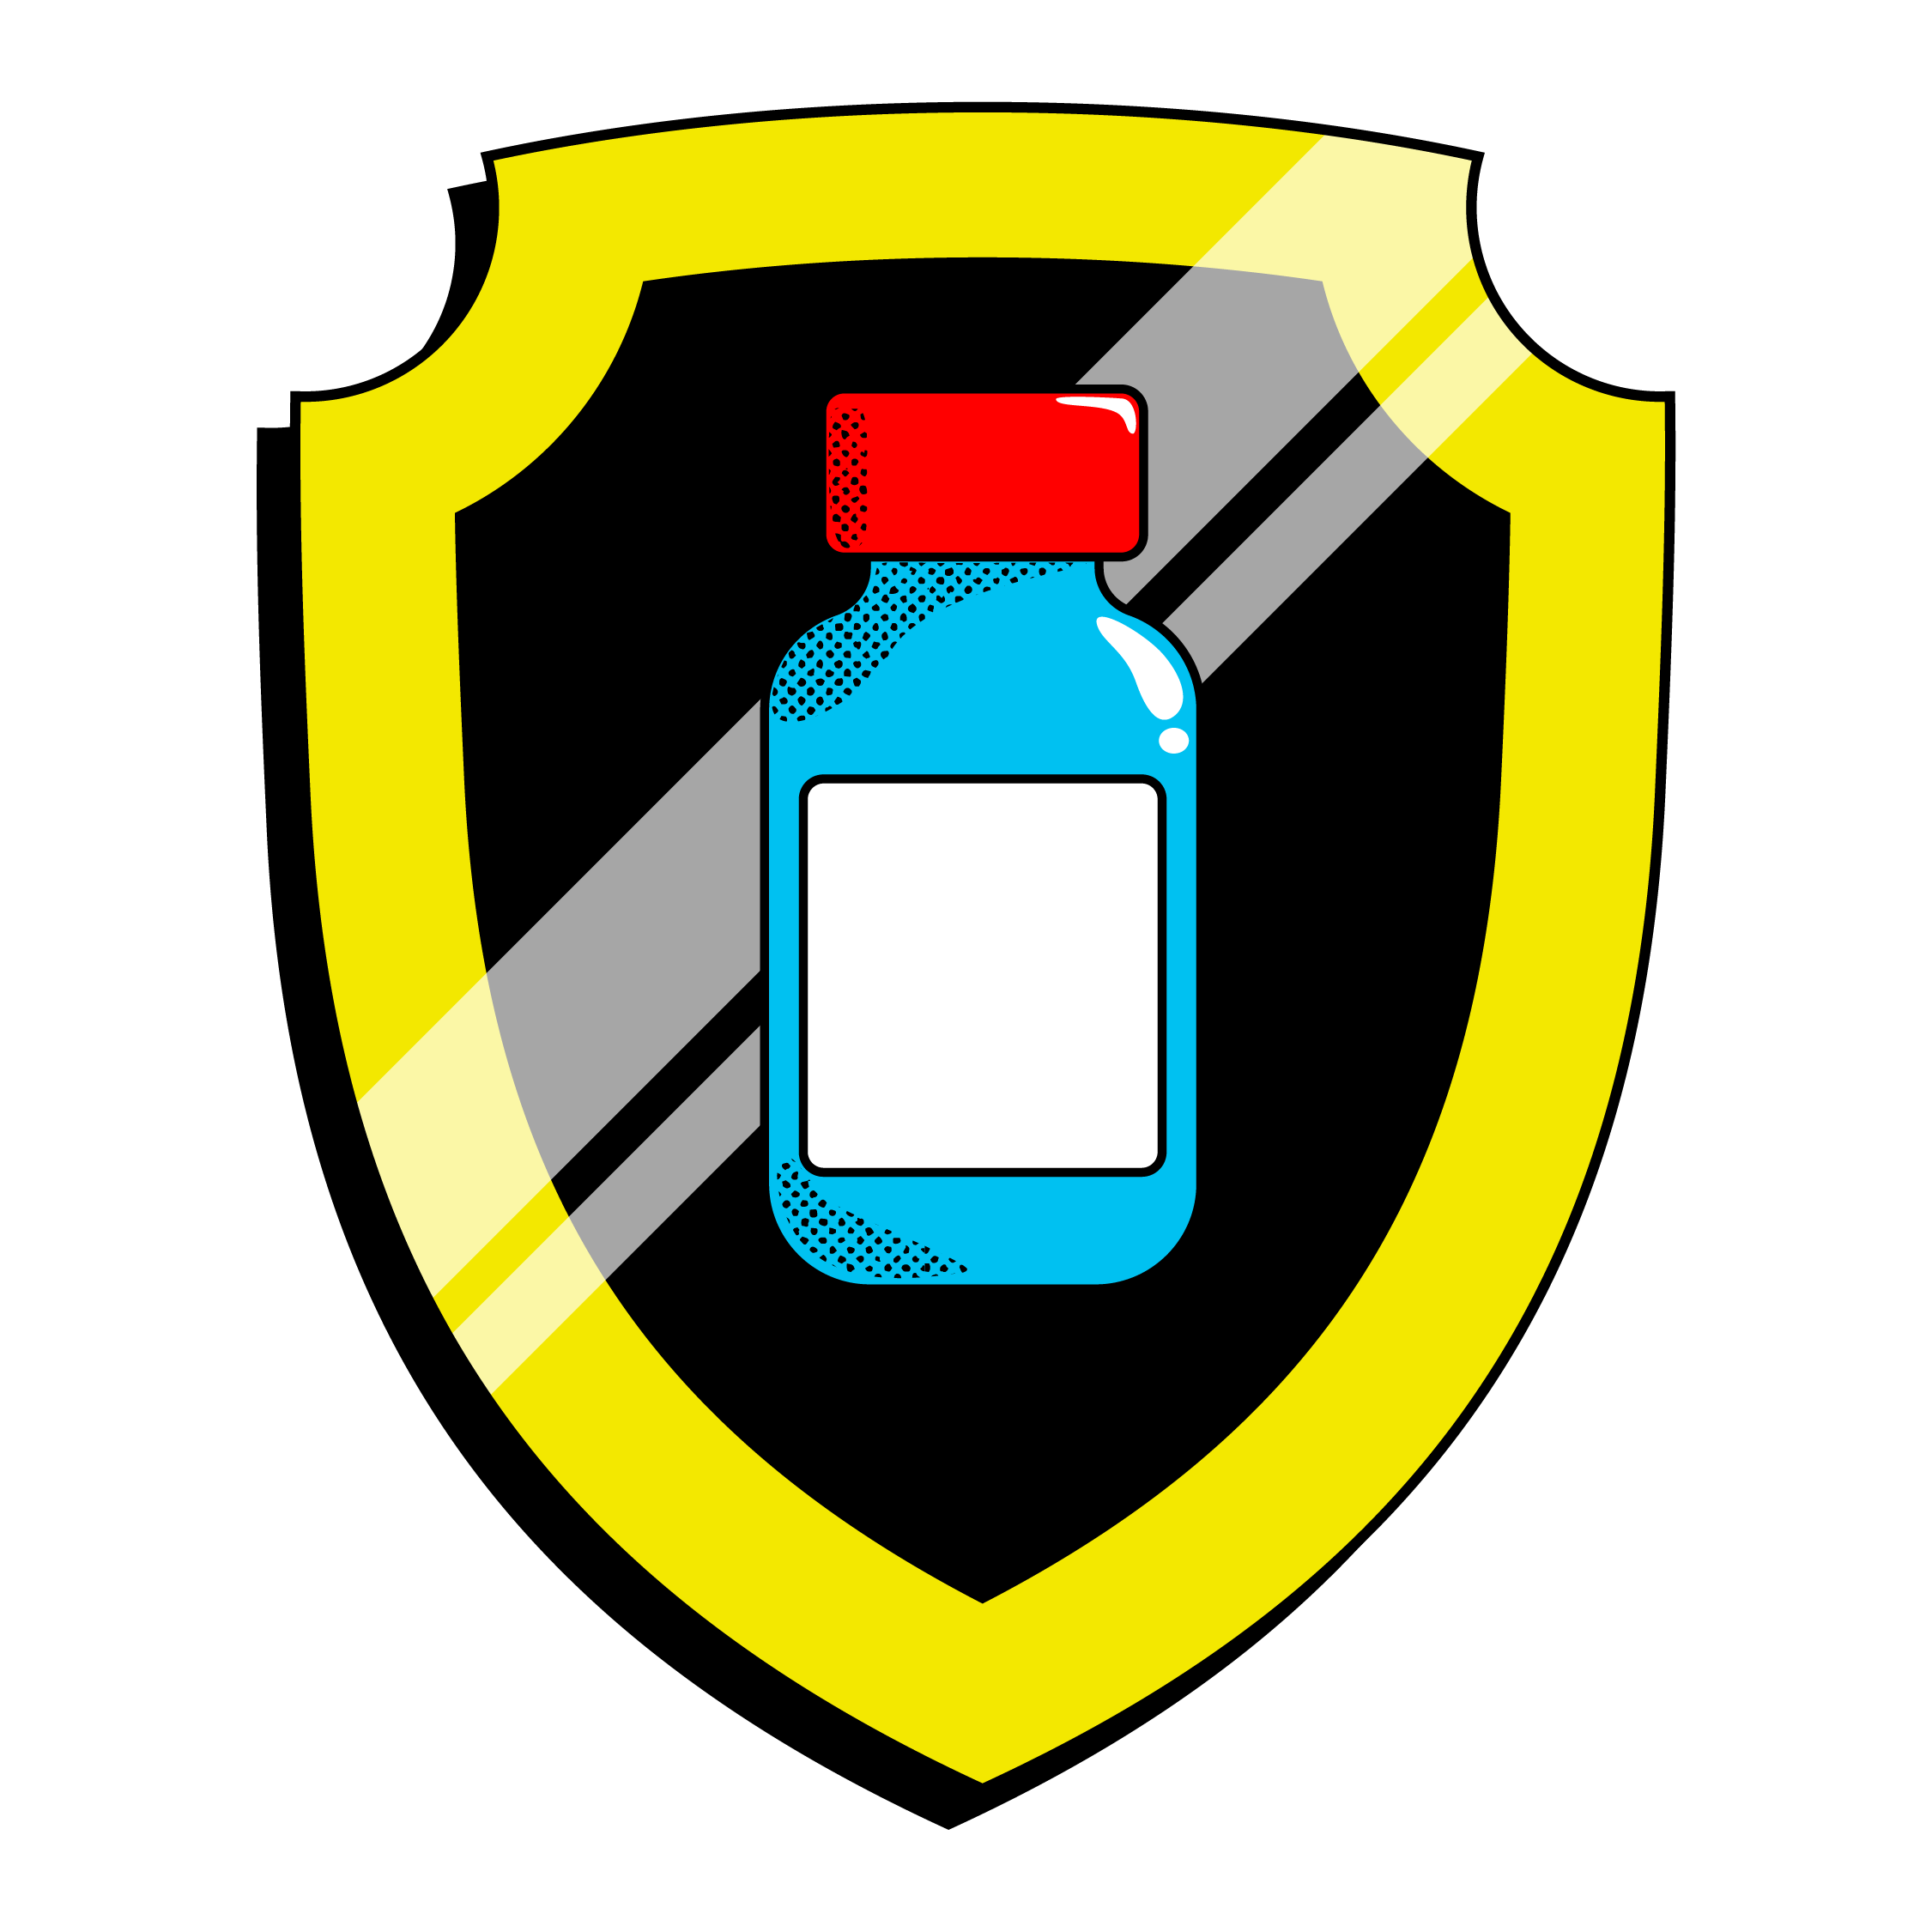 Illustration of blue vaccination vial in a yellow badge with black background.